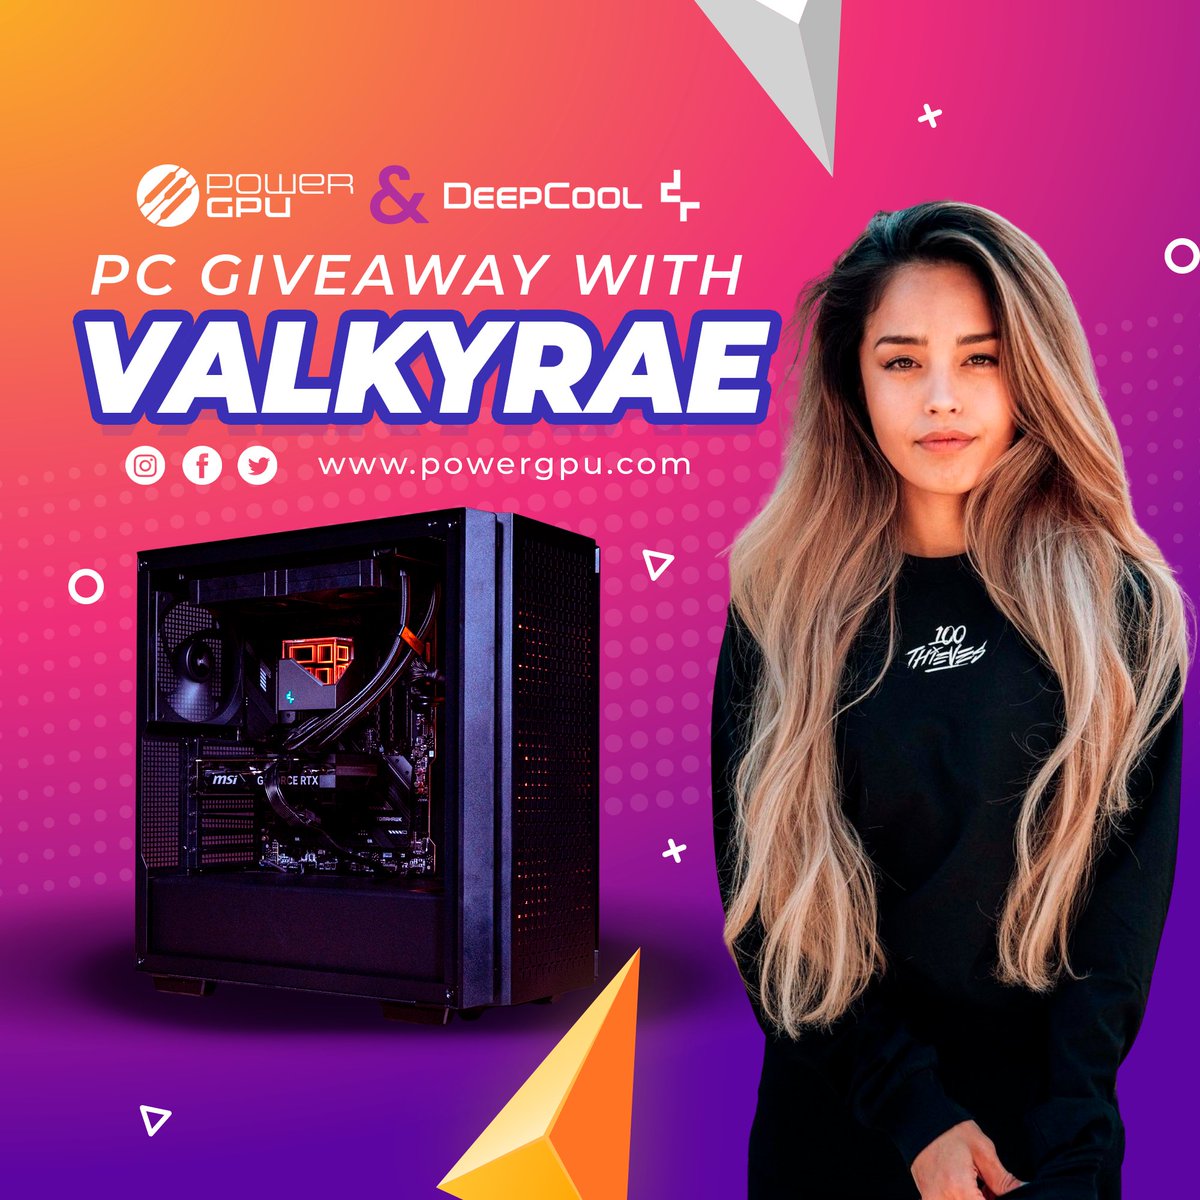 We have teamed up with @DeepCoolNA to giveaway a PC on behalf of @Valkyrae. ✅ Like ✅ Follow ✅ Repost ✅ Tag a friend ✅ For extra entries click the link Gleam.io/1SkzG/deepcool…